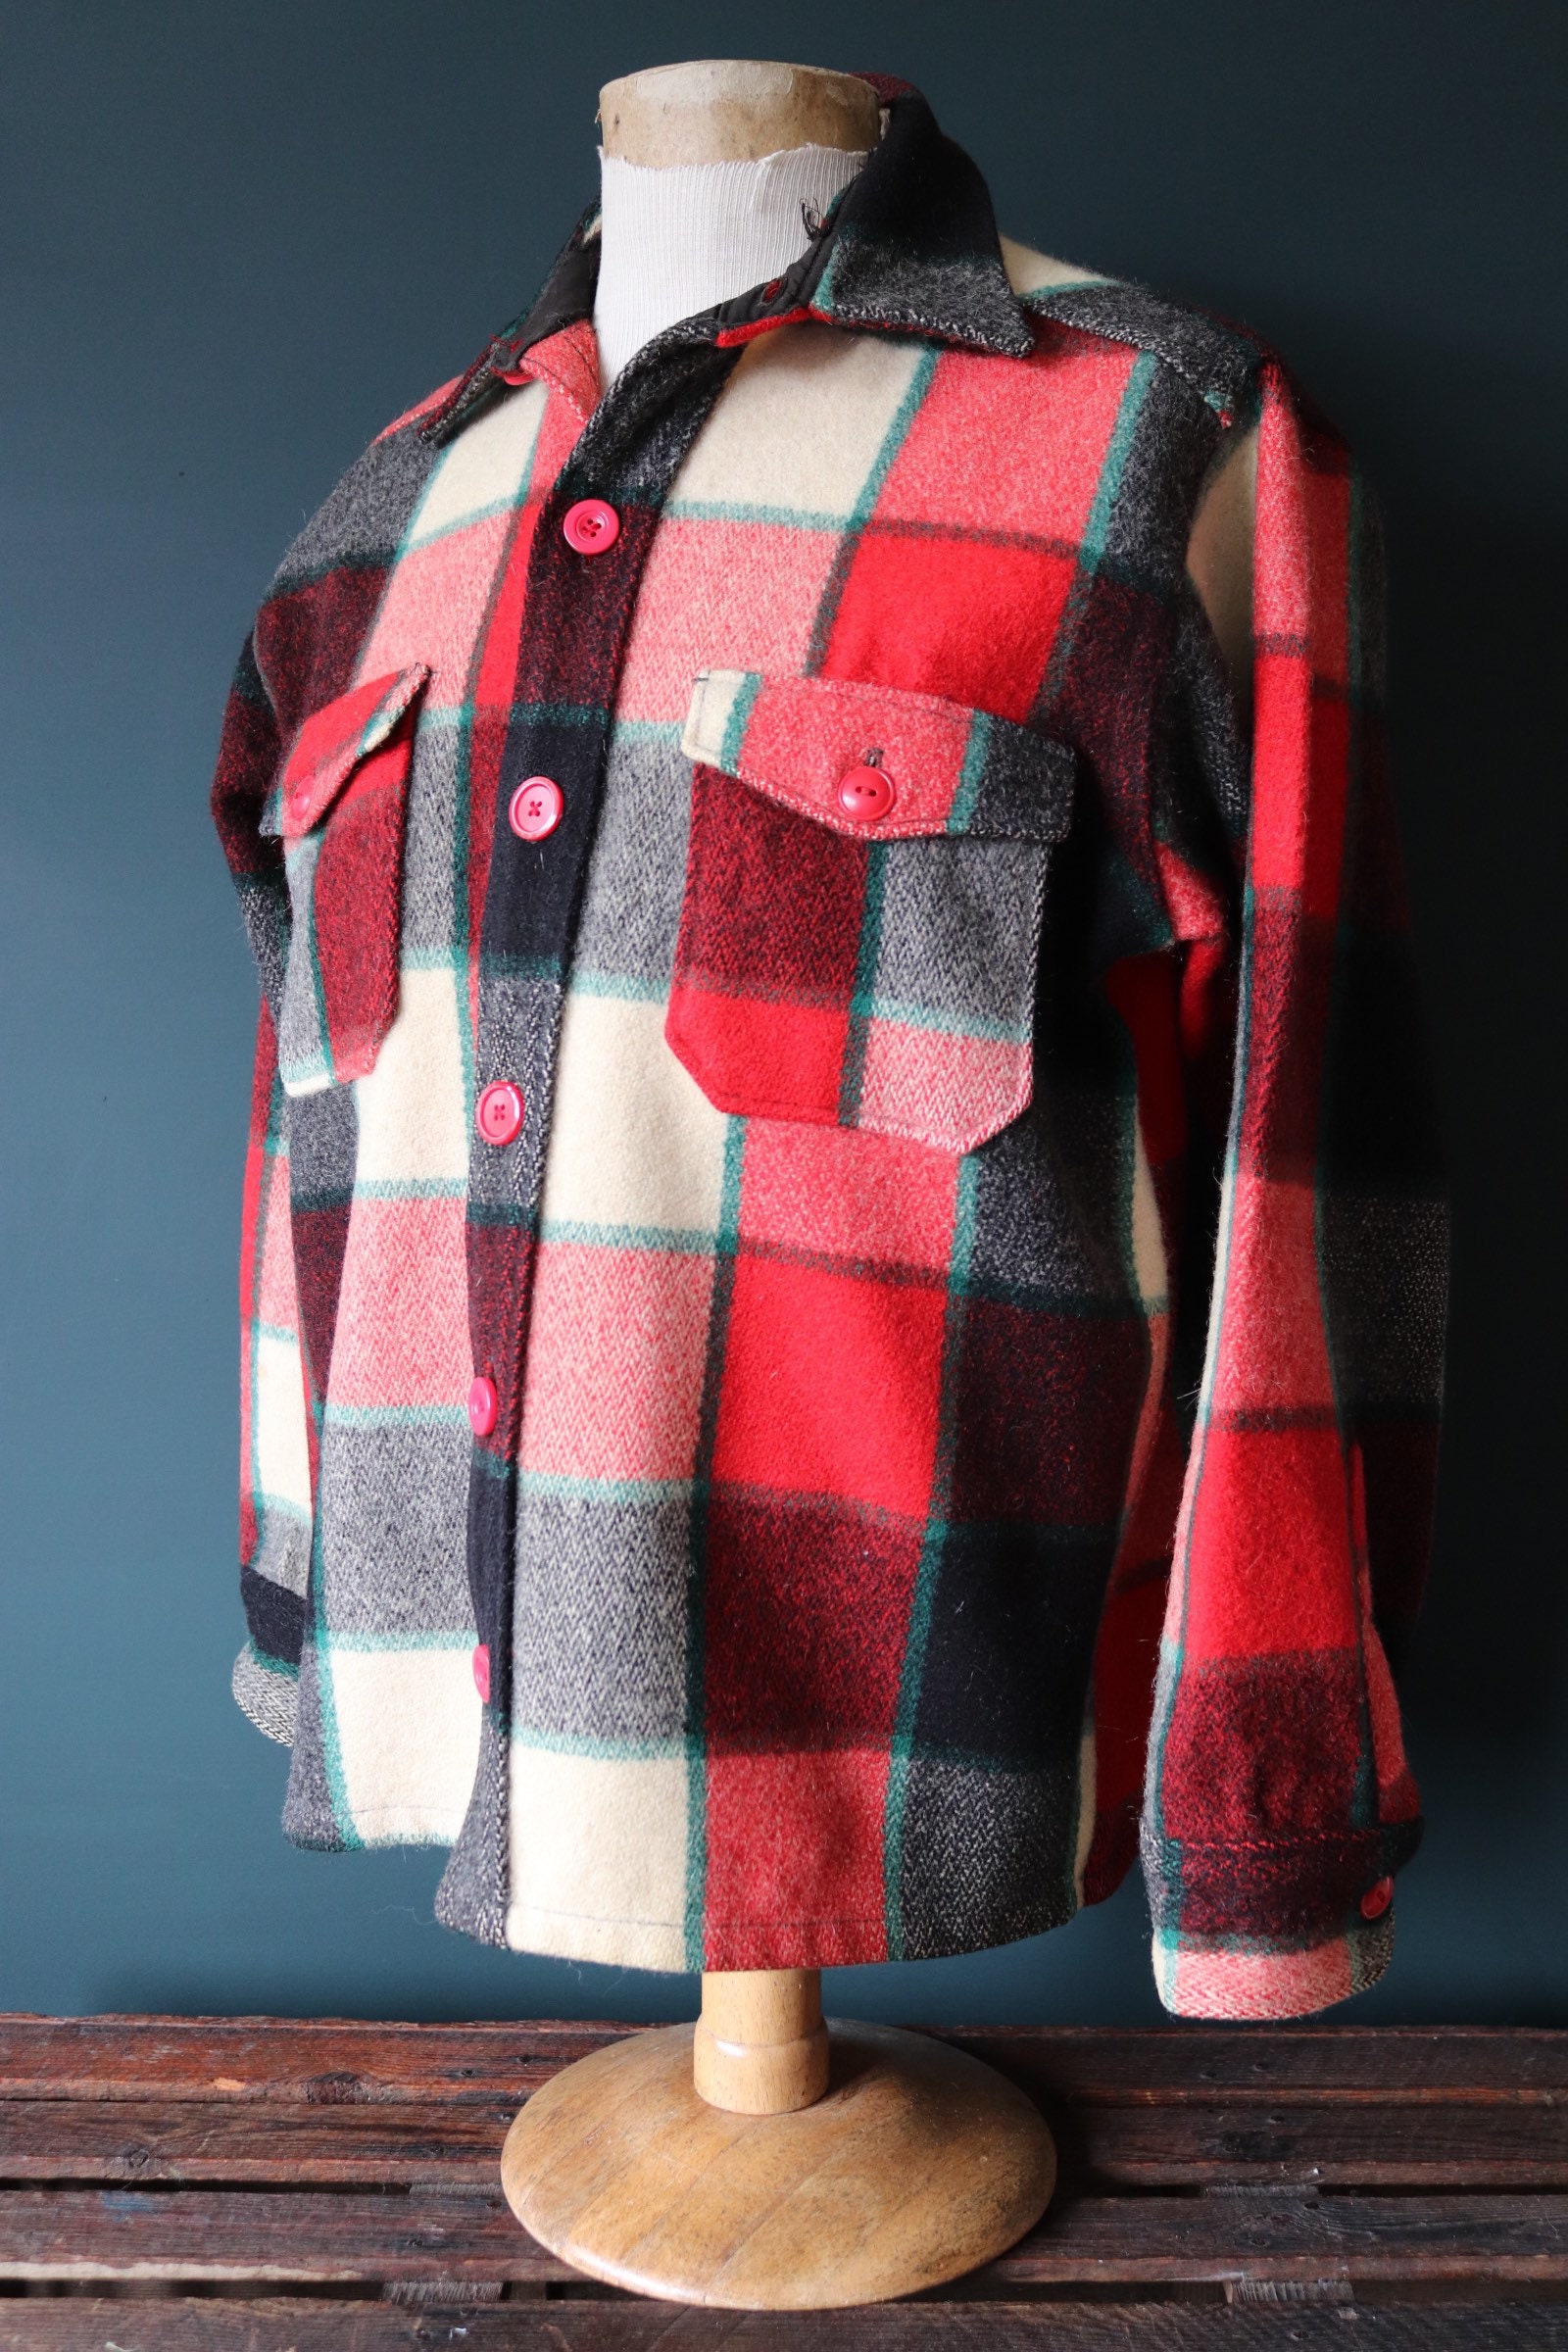 Vintage 1950s 50s 1960s 60s red black white checked plaid wool shirt ...